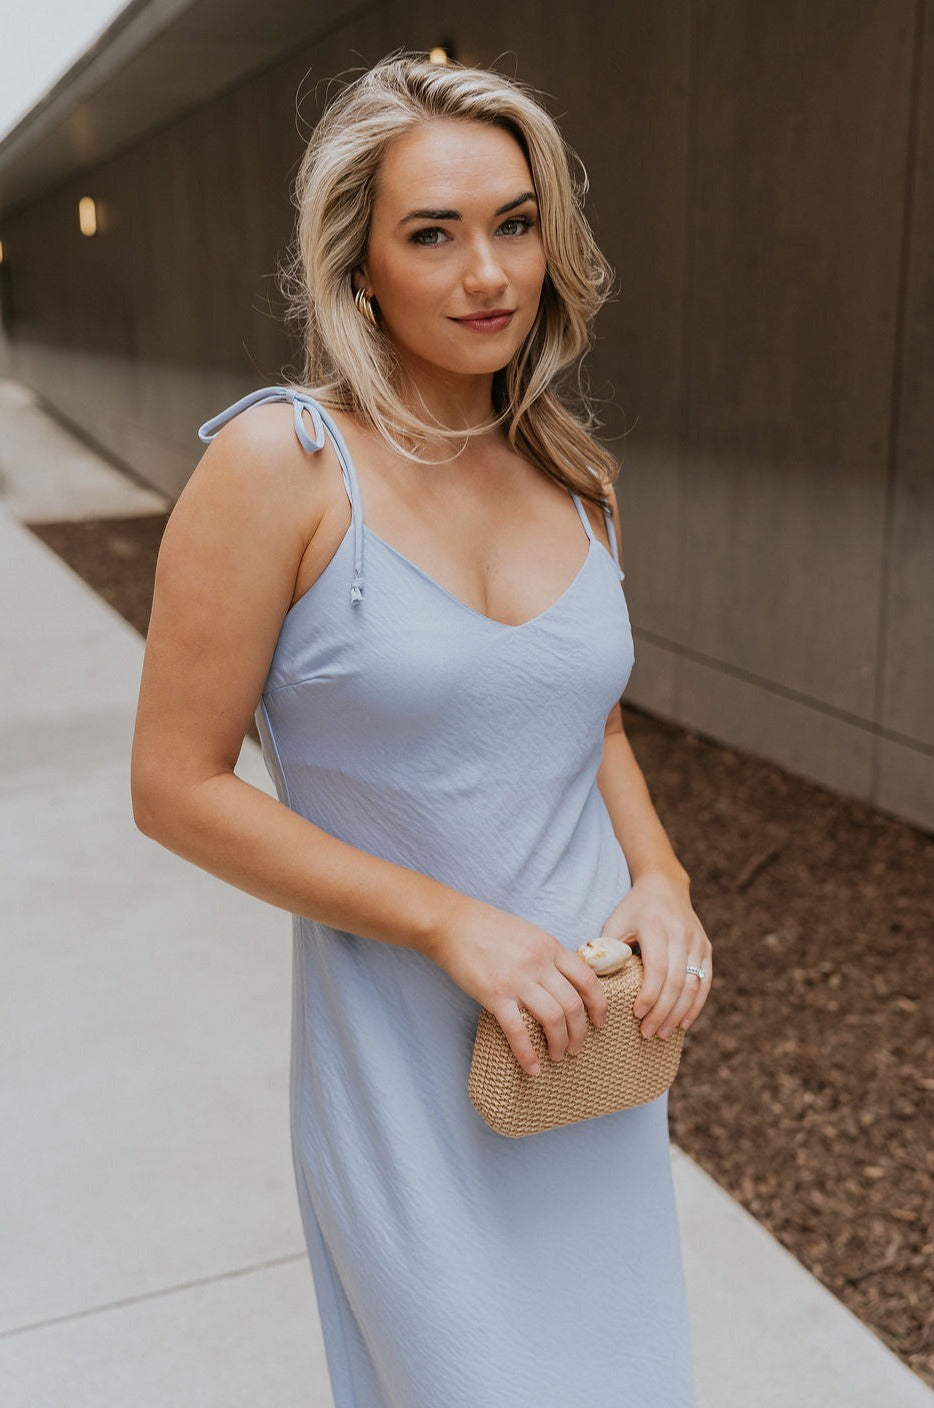 Front view of female model wearing the Colette Light Blue Midi Dress which features Light Blue Lightweight Fabric, Midi Length, V-Neckline and Tie Straps